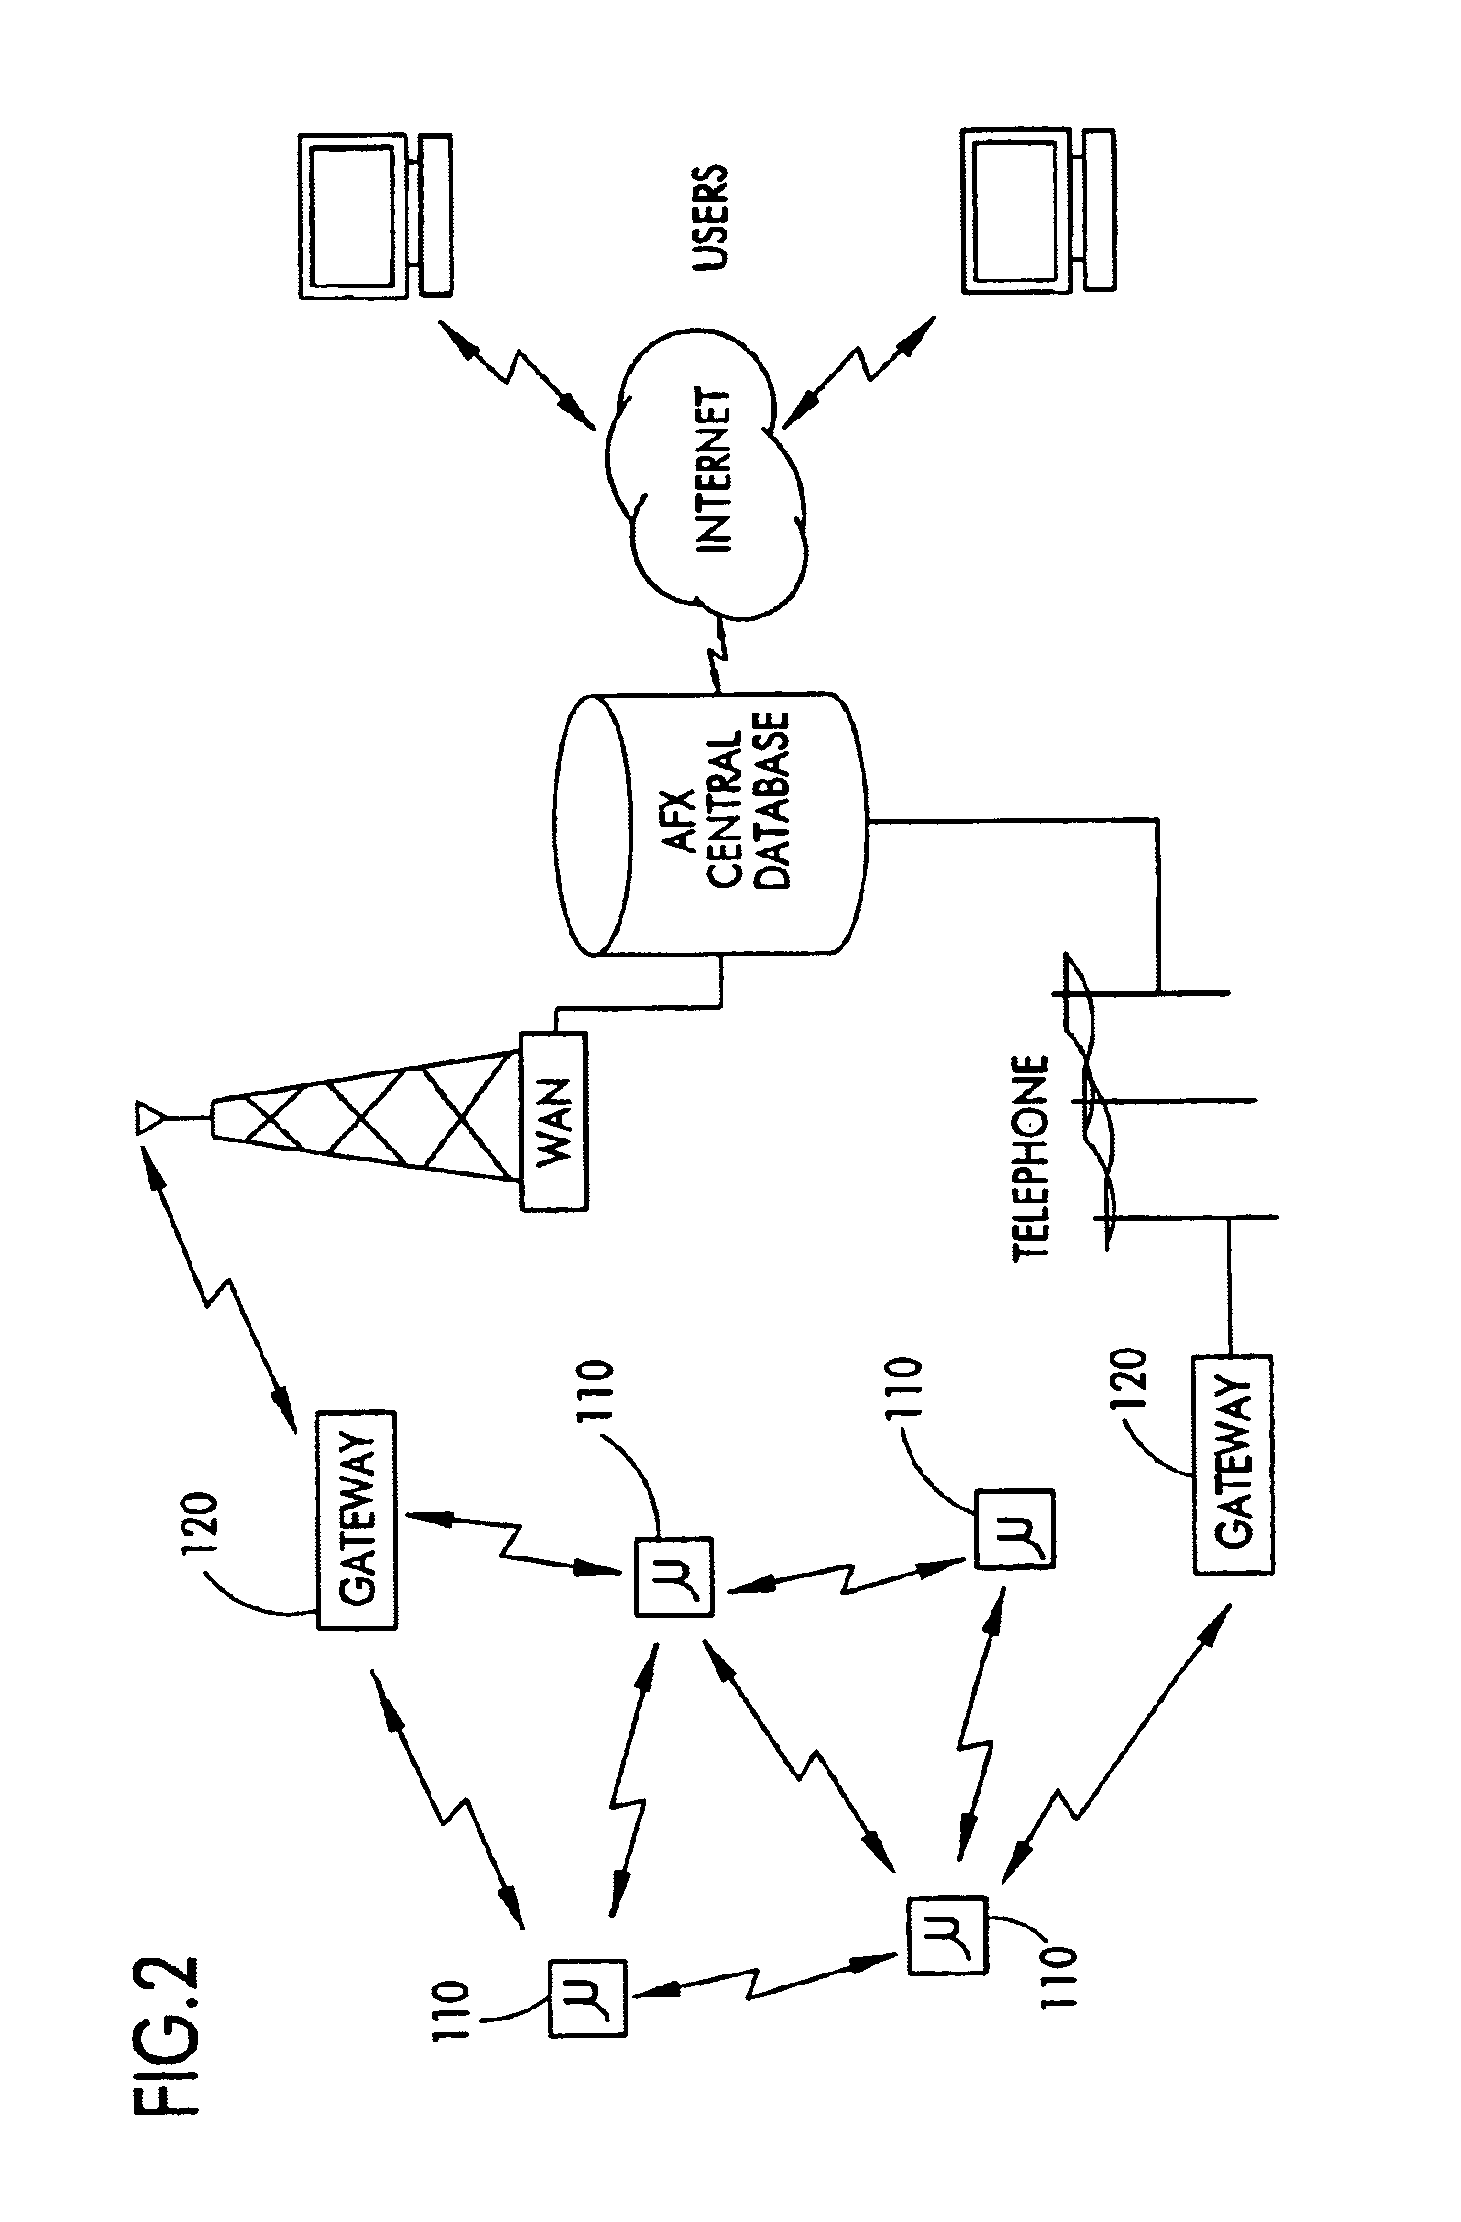 On/off keying node-to-node messaging transceiver network with dynamic routing and configuring